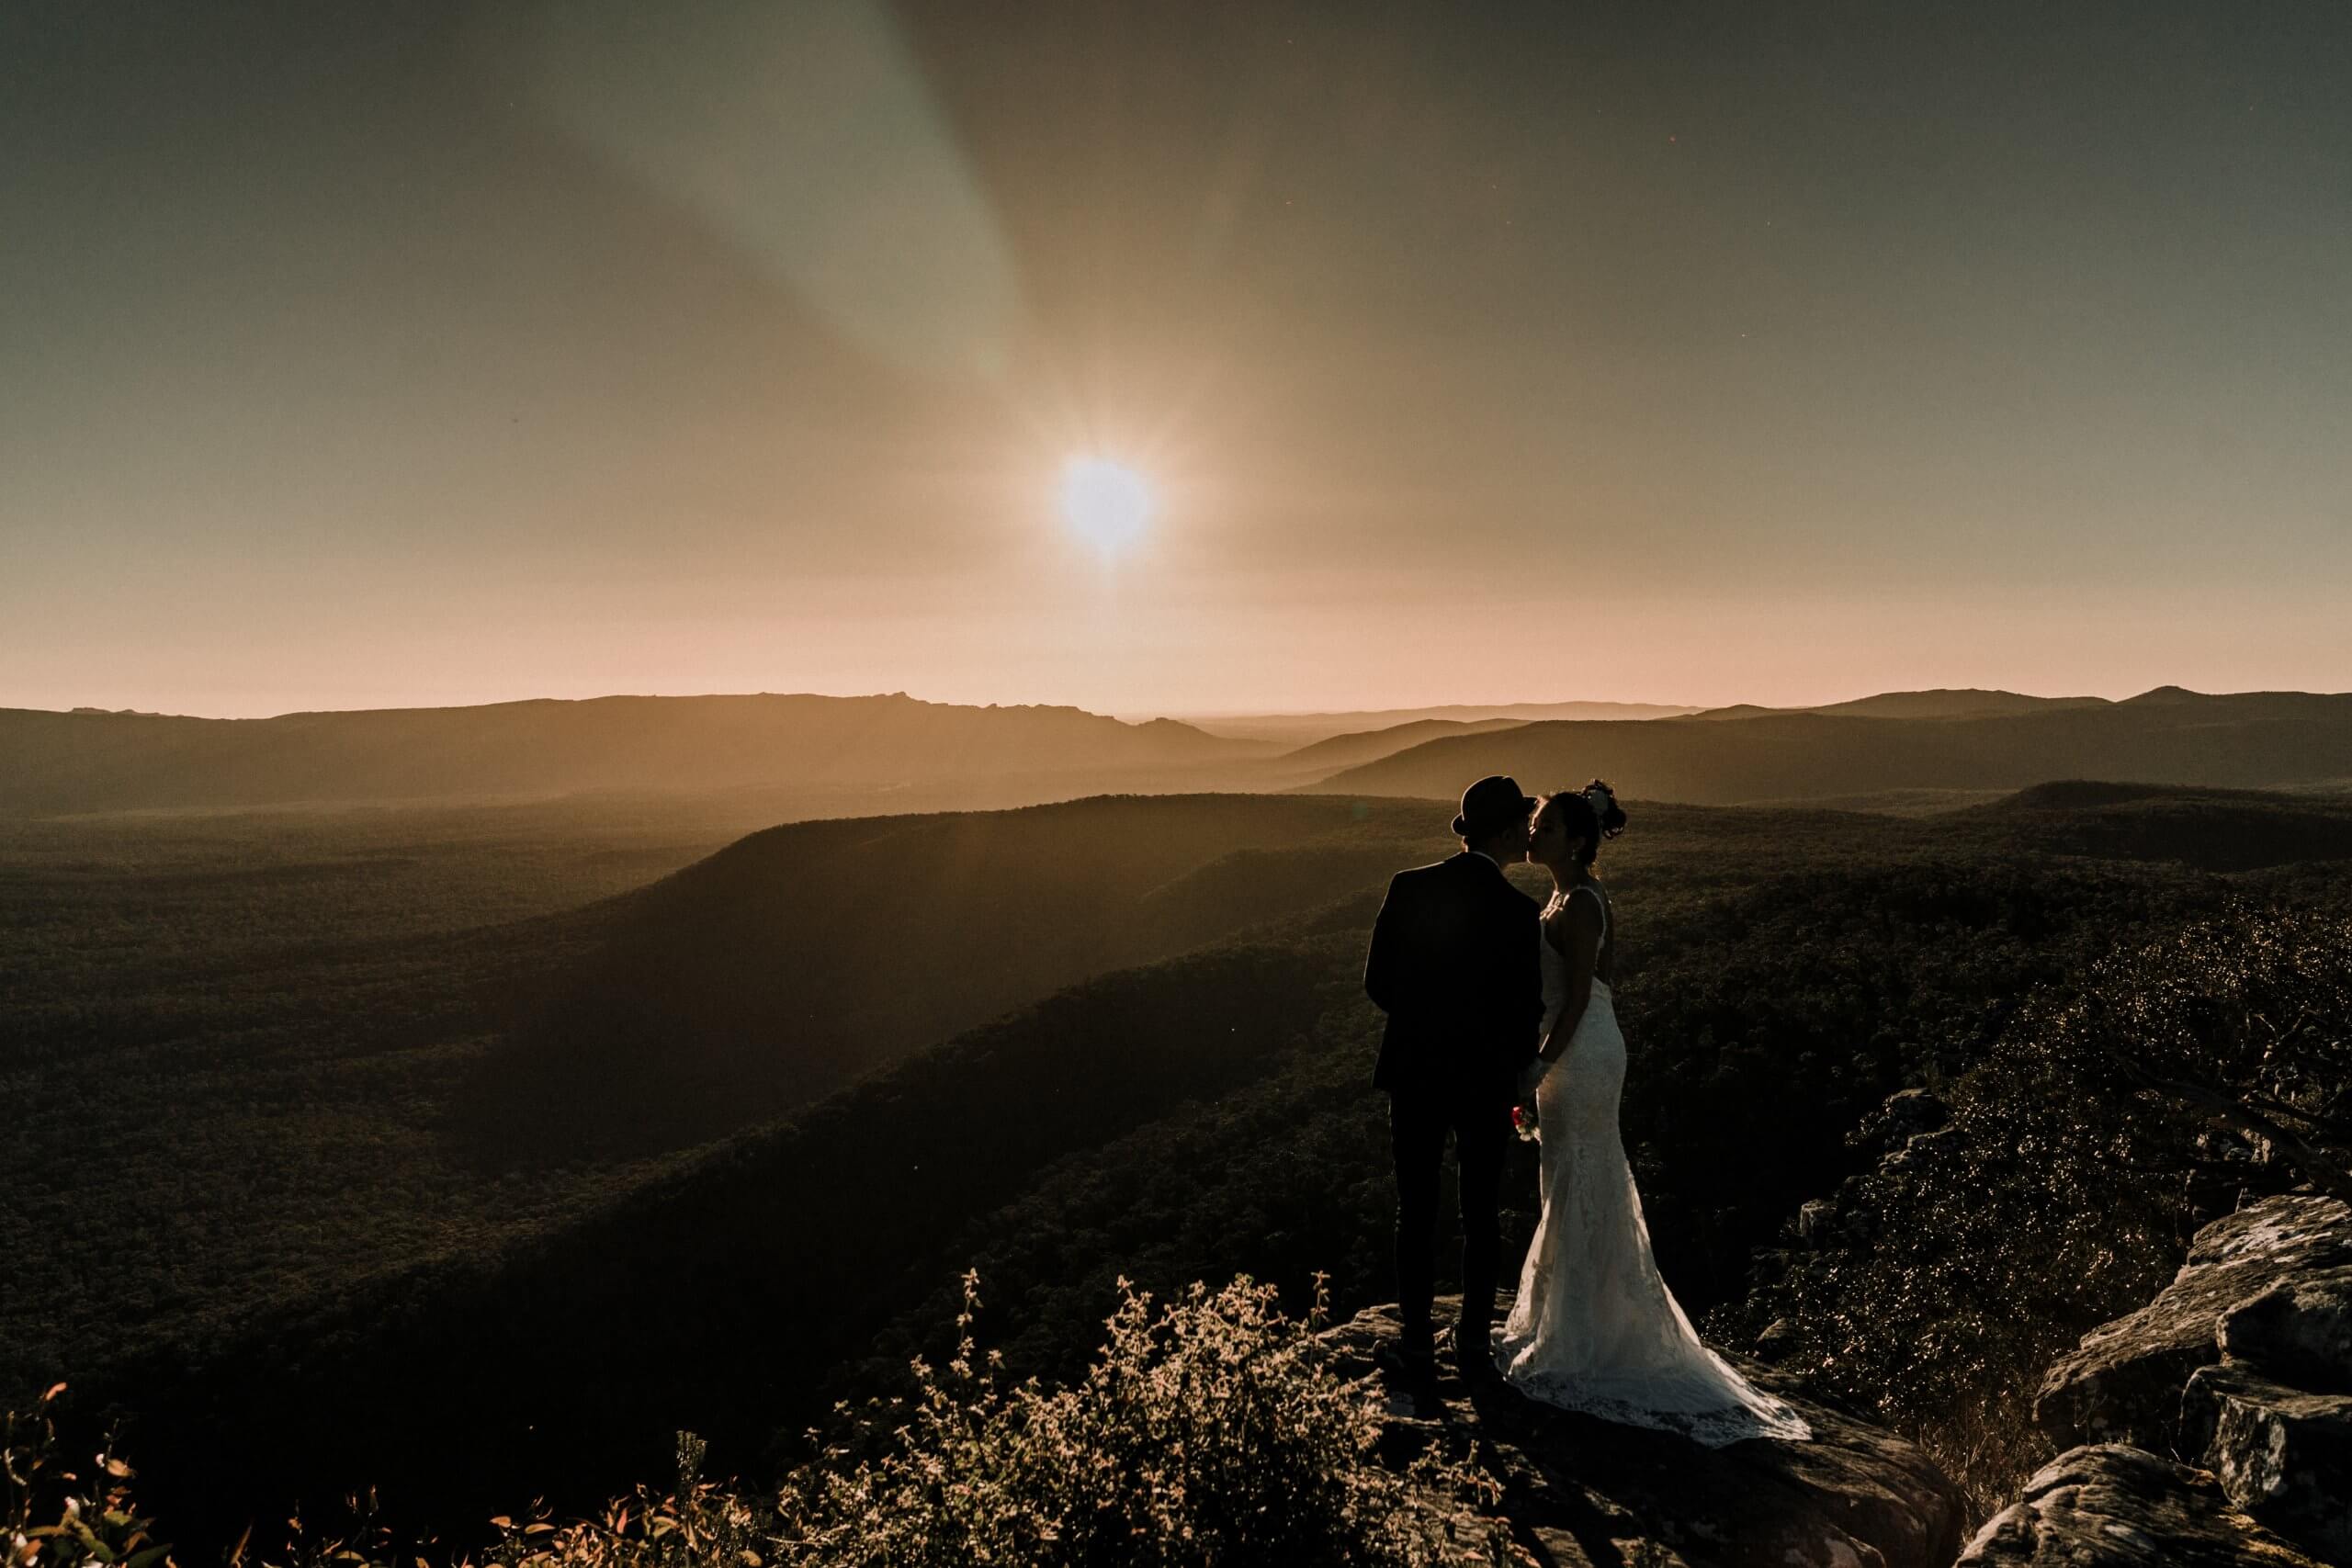 Beautiful couple with a stunning view of the mountains, captured by black avenue productions